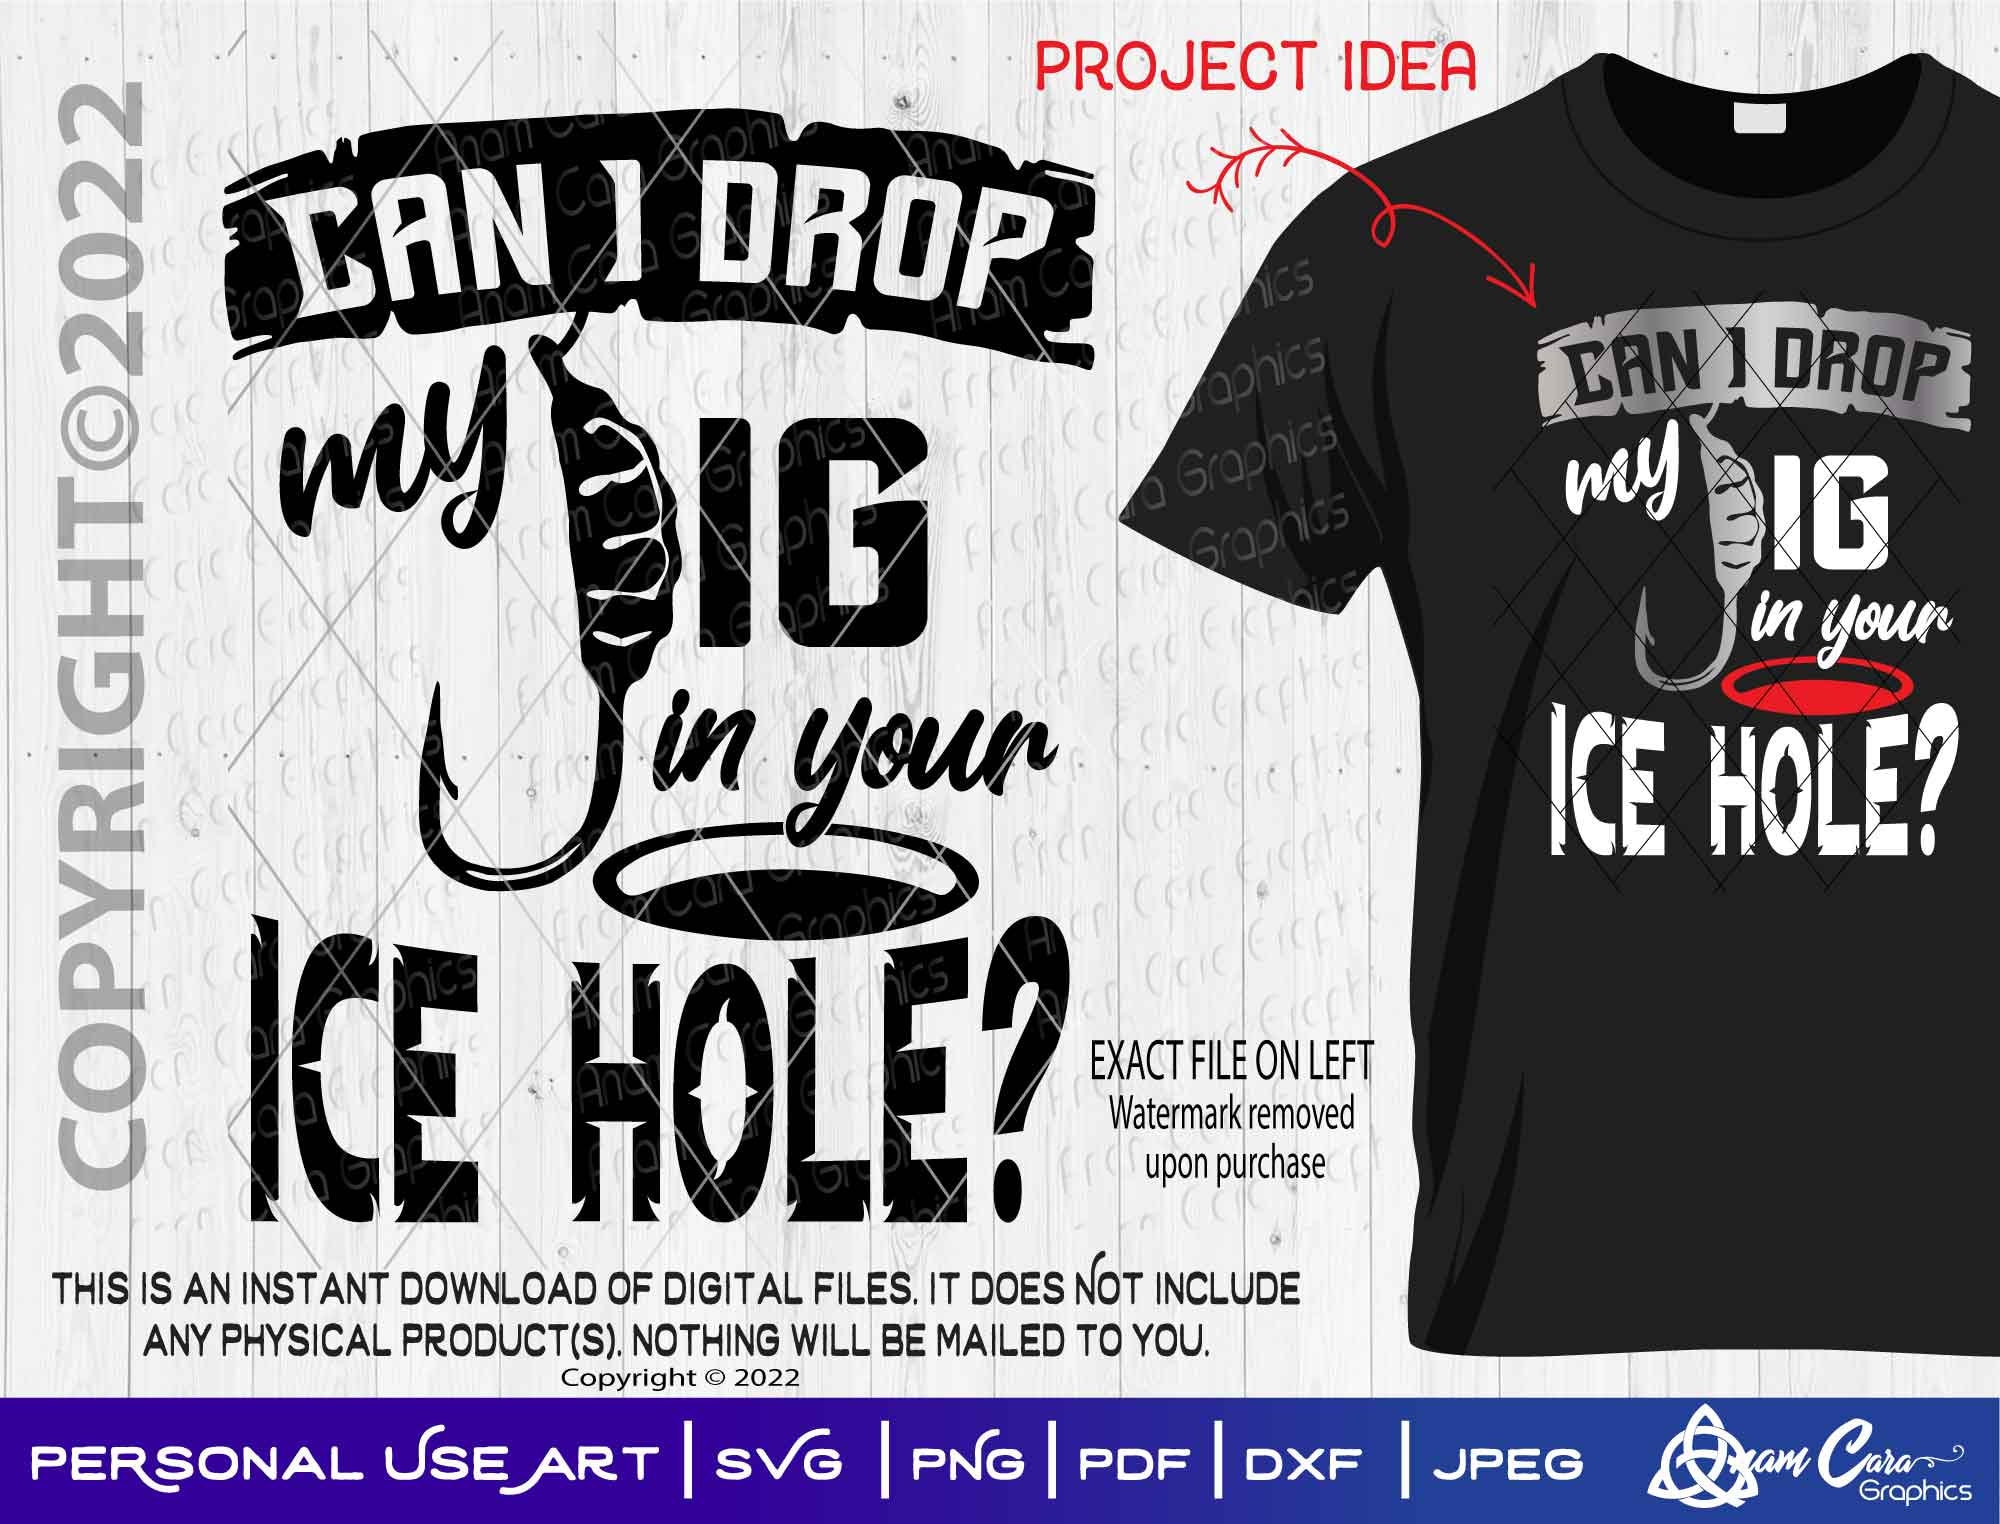 Can I Drop My Jig in Your Ice Hole Digital Design SVG Cut or Print Funny  Ice Fishing Winter Auger Drill Decal Tee Shirt Frozen Lake Jig 